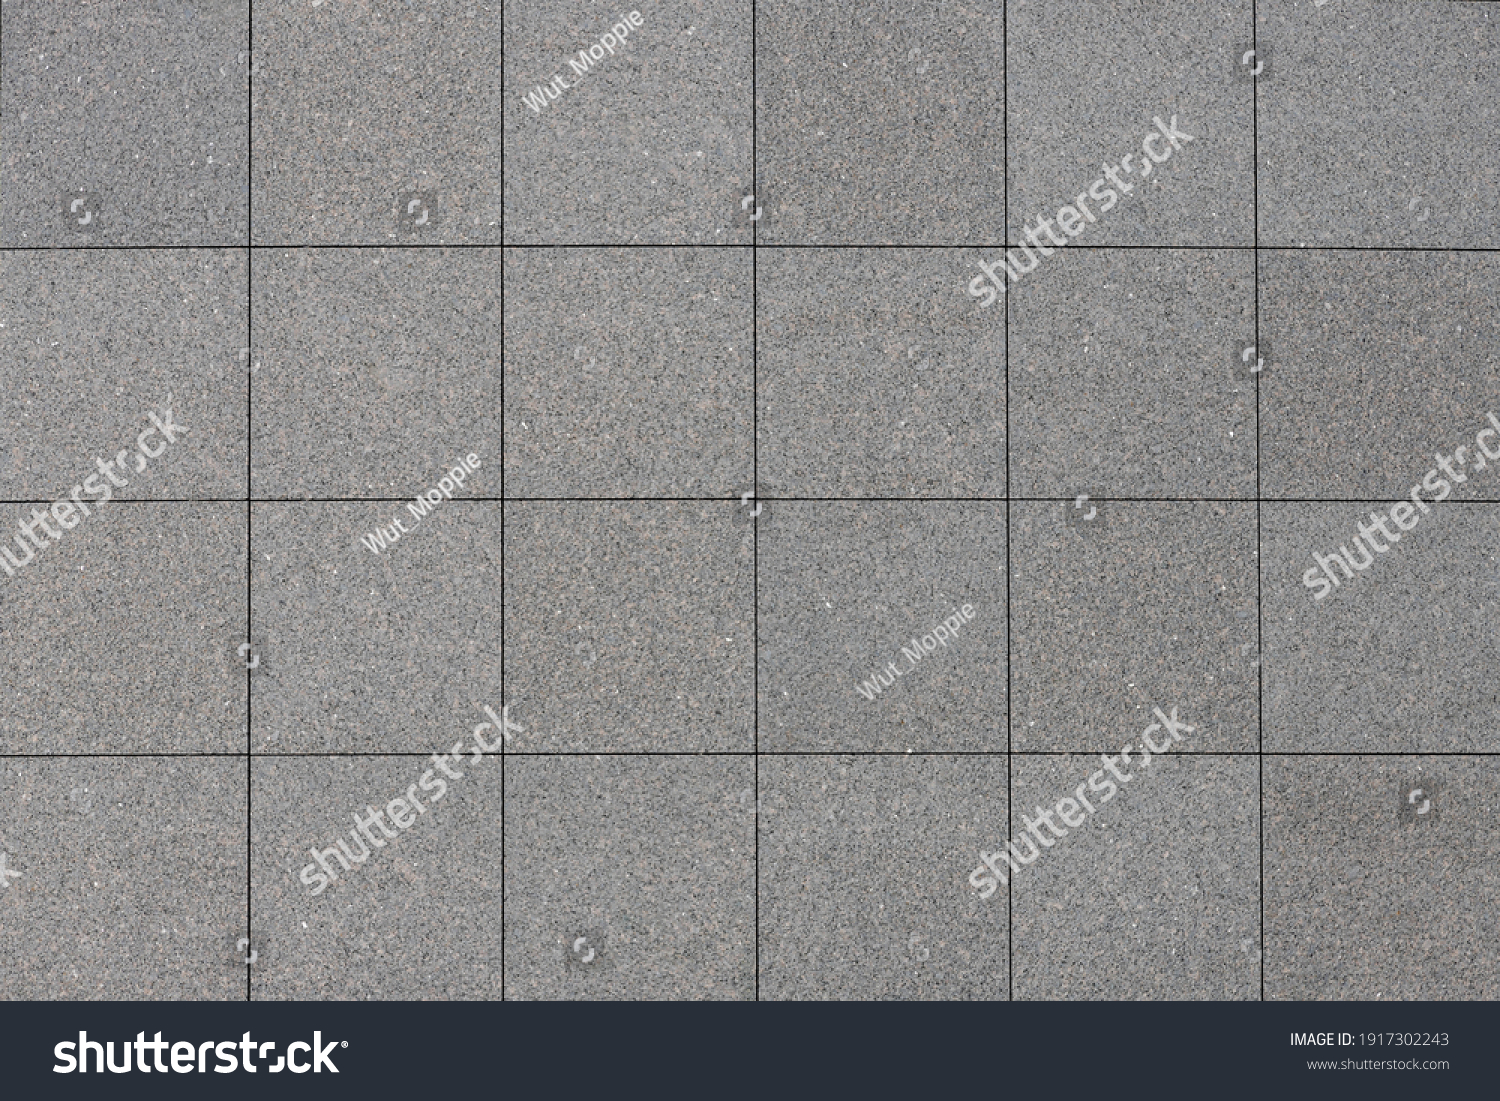 Vintage dark grey brick background, Abstract geometric pattern texture, Outdoor building block wall, Can be used as background for display or montage your products. #1917302243